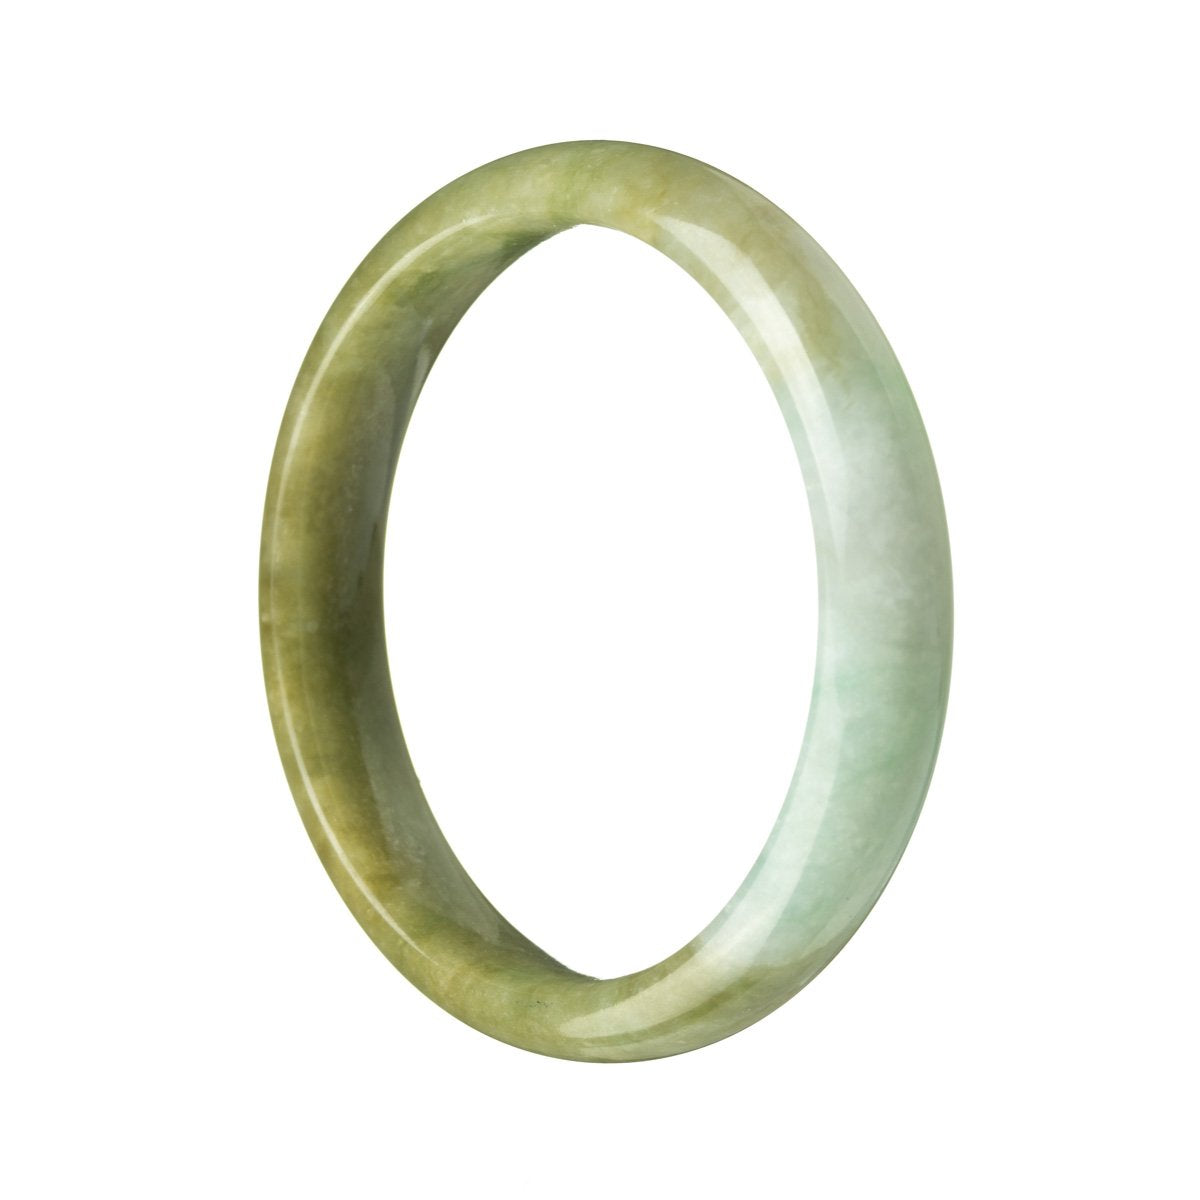 A beautiful greenish-brown traditional jade bracelet with a semi-round shape, measuring 59mm. Perfect for adding a touch of elegance and authenticity to any outfit. From MAYS GEMS.